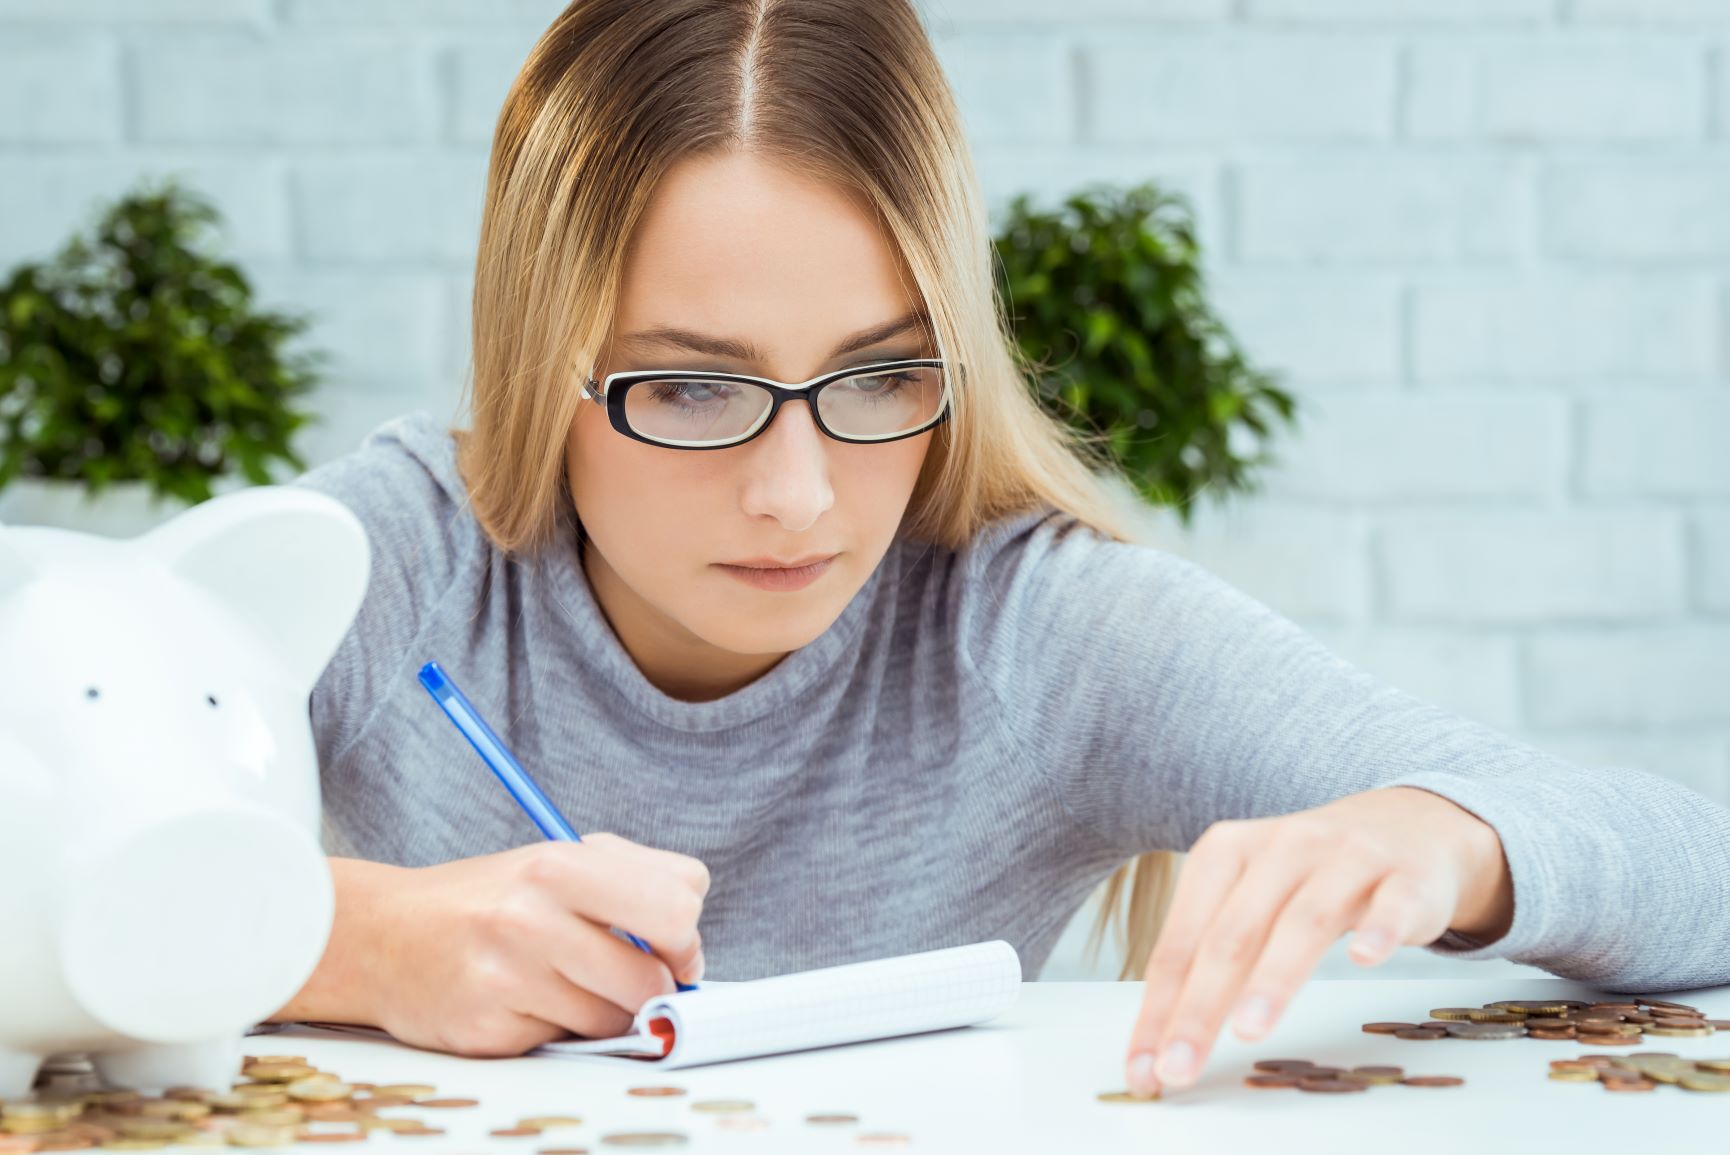 Young woman looking at coins and writing on a pad of paper